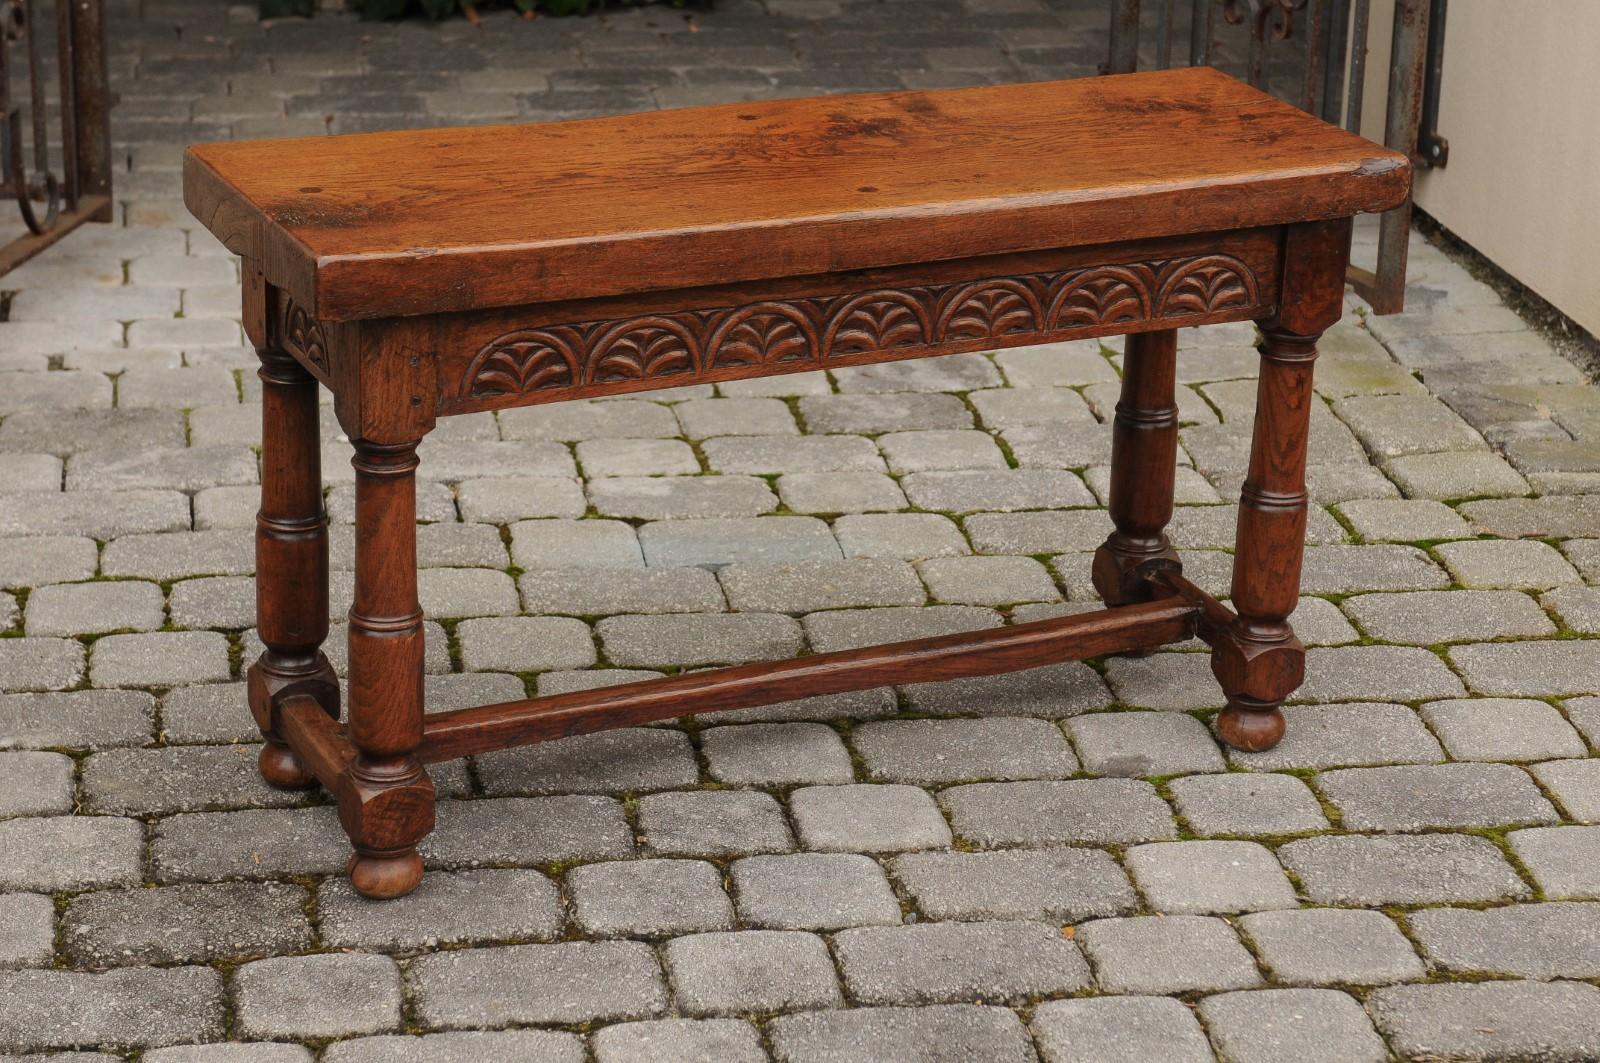 19th Century English Oak 1880s Bench with Low-Relief Carved Decor and Column-Shaped Legs For Sale